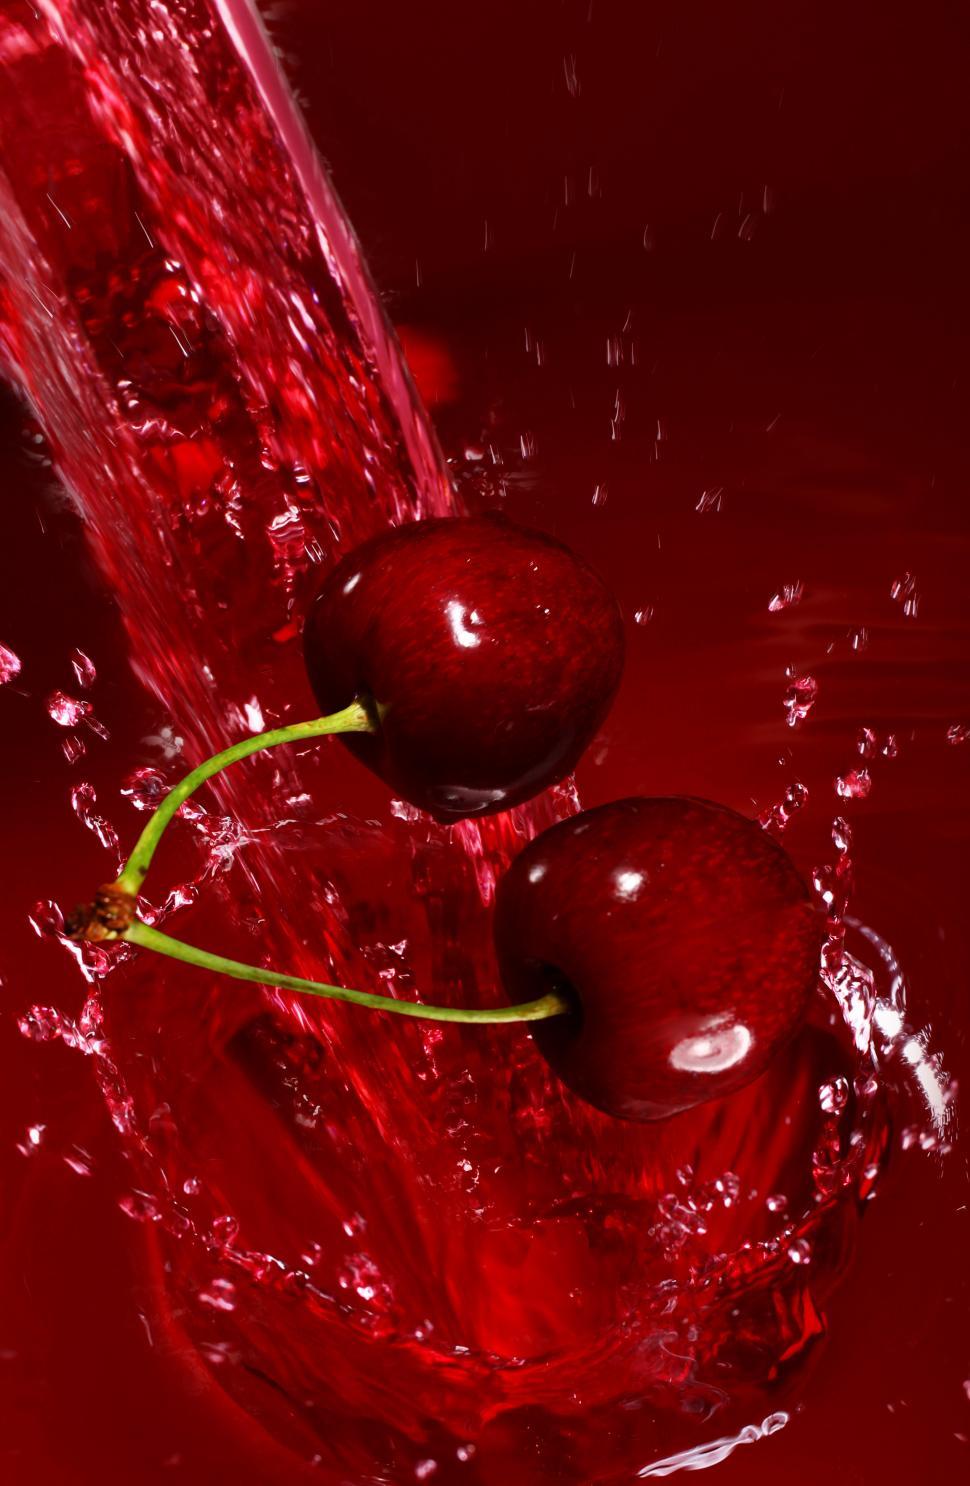 Free Image of Two cherries fall into stream of juice 